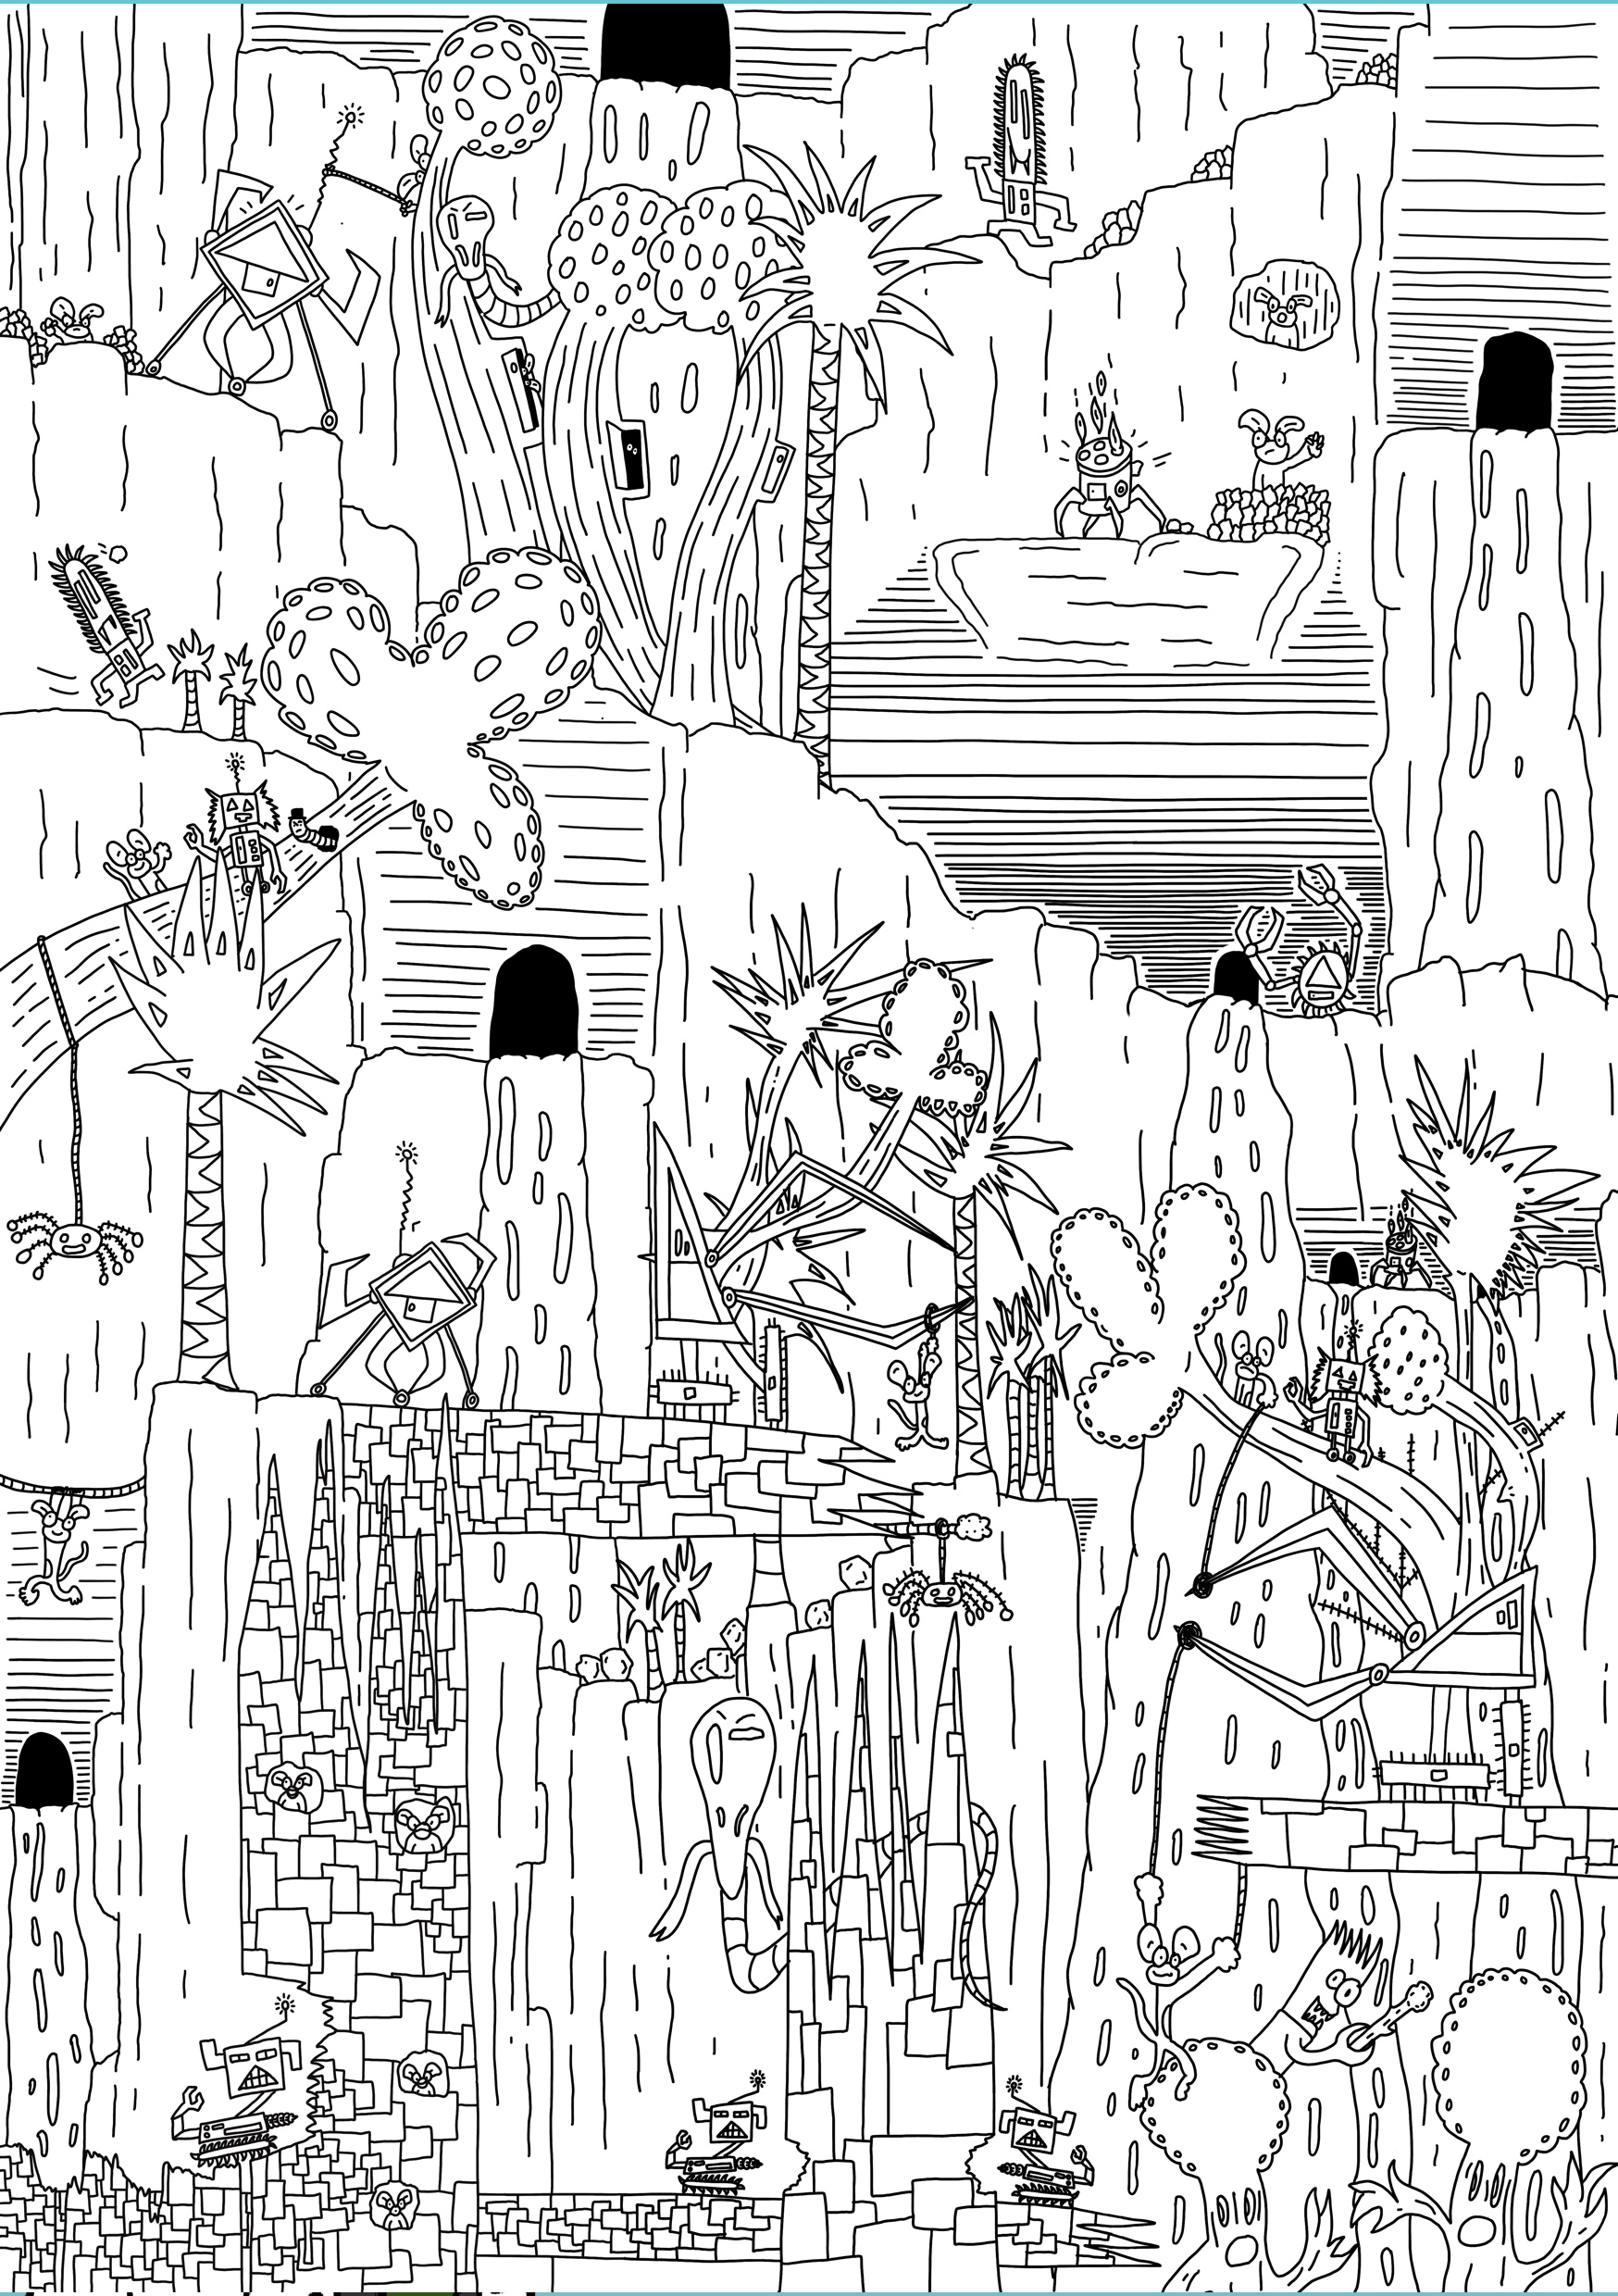 Illustration artwork by Craig Bulloch for A2 colouring in poster themed around deforestation